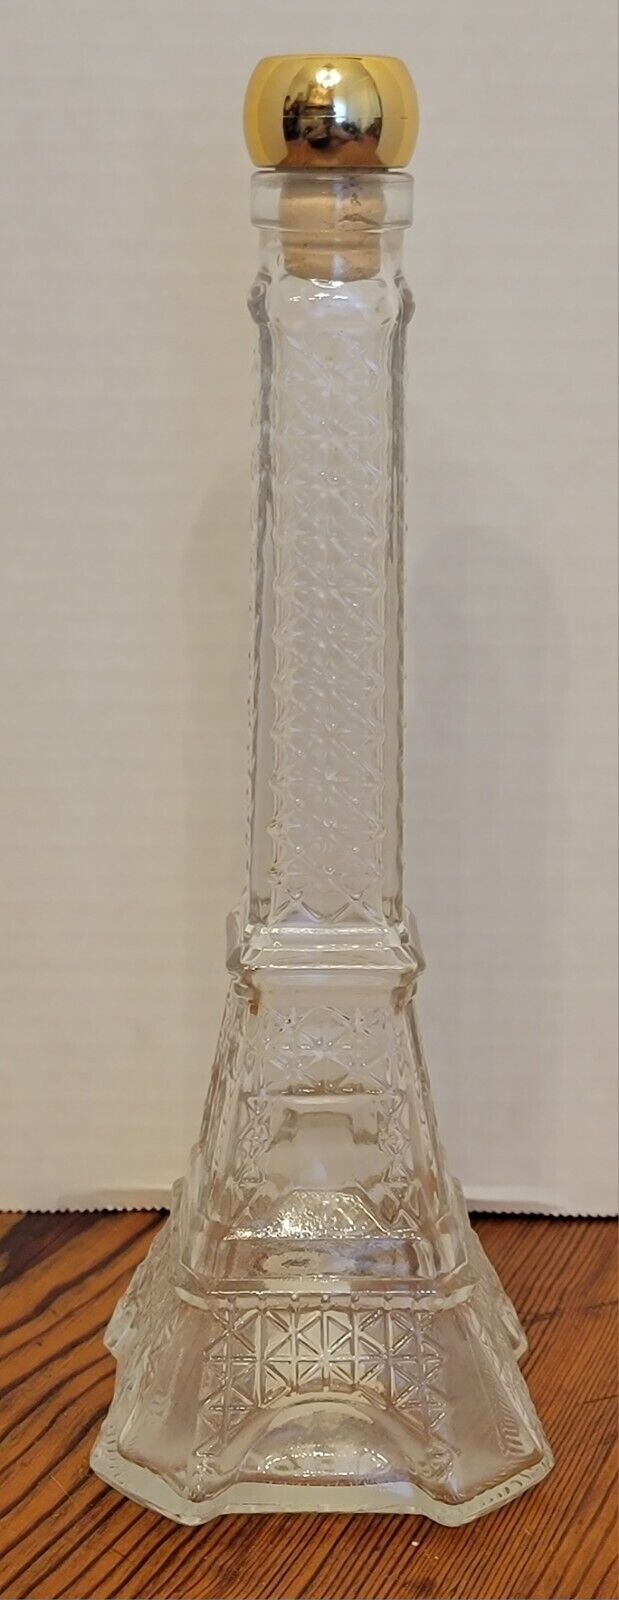 EIFFEL TOWER Vintage French Glass Bottle Novelty Glass Bottle Collectible Glass